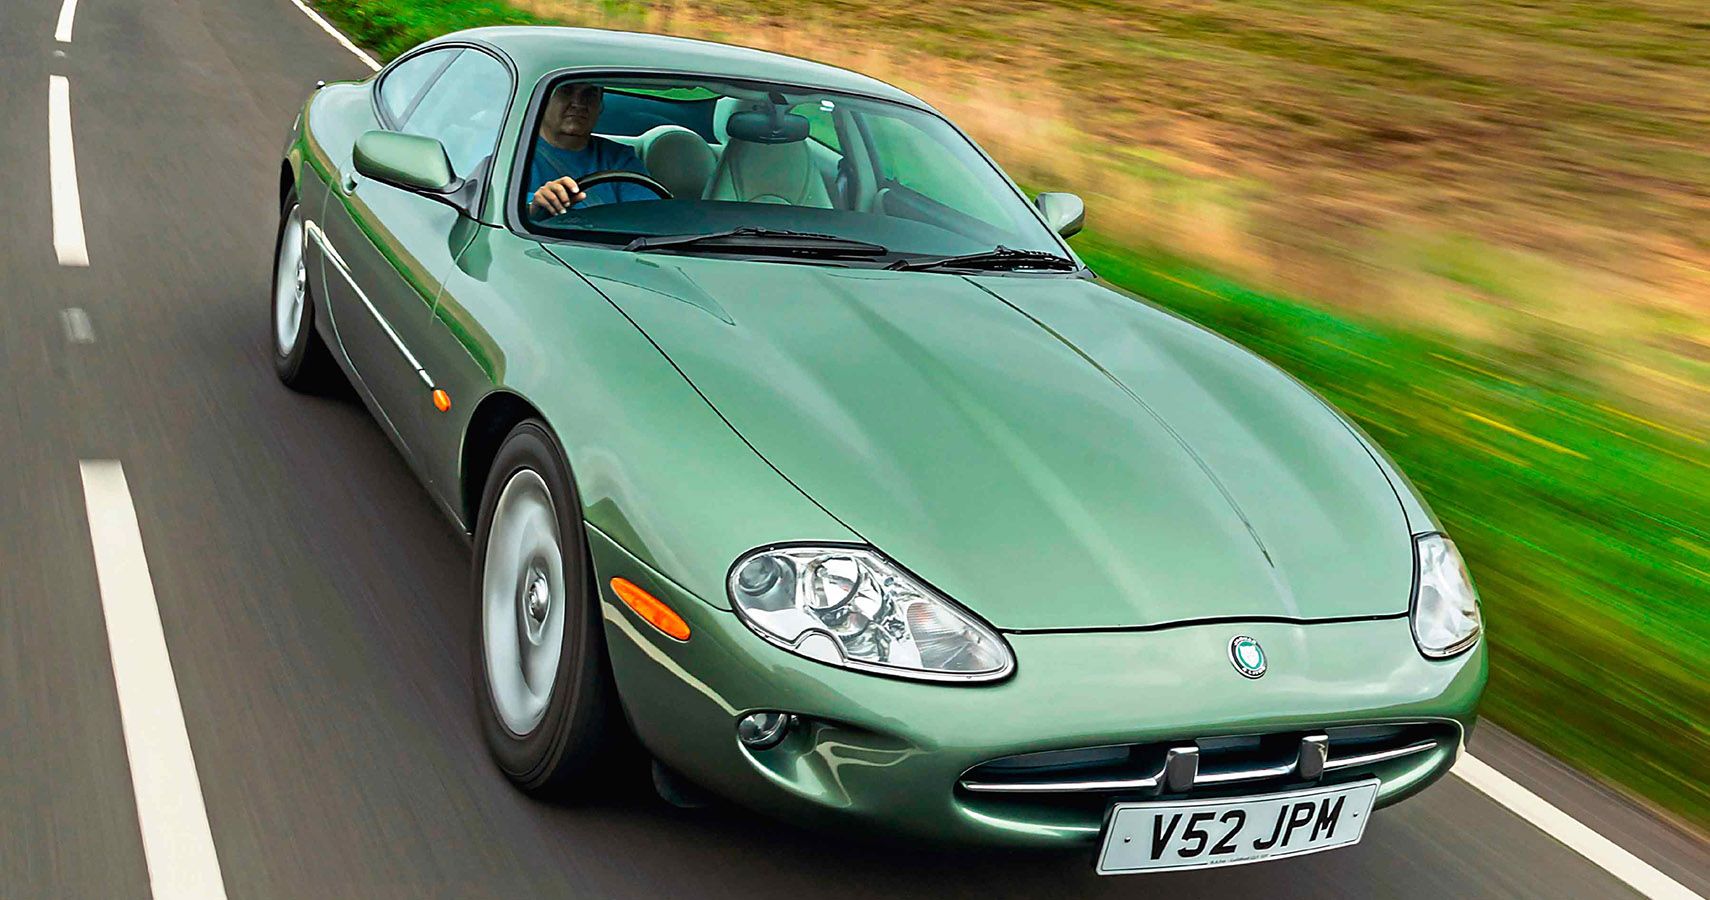 Here Are The Greatest Driver-Focused Sports Cars Under $10,000